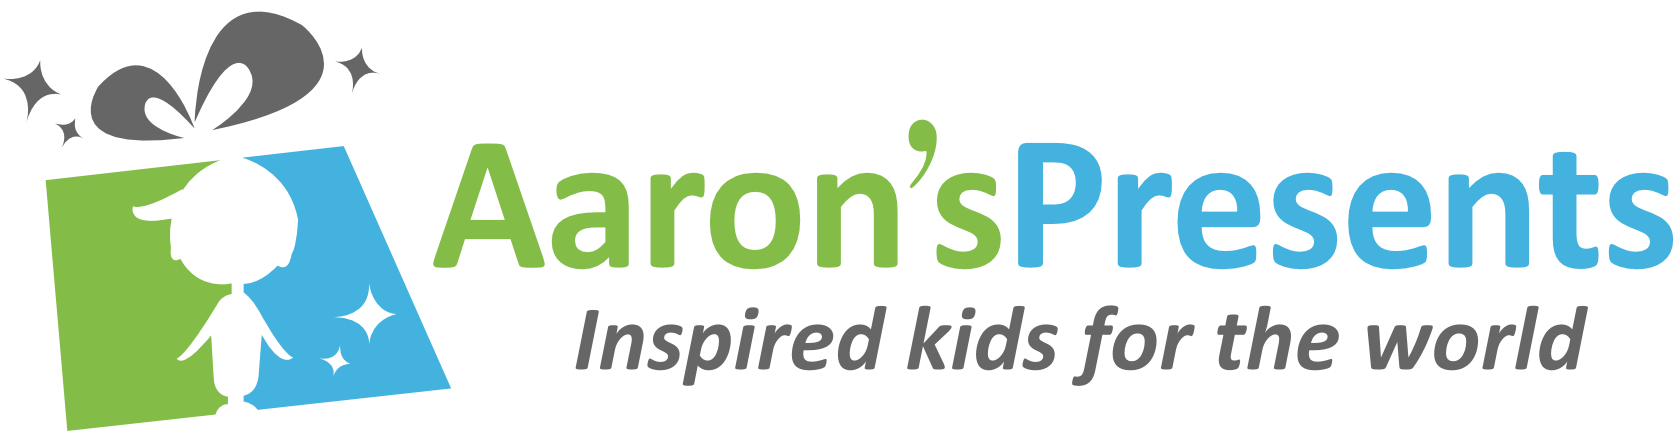 Aaron's Presents | Best Dentist Office Andover MA 01810